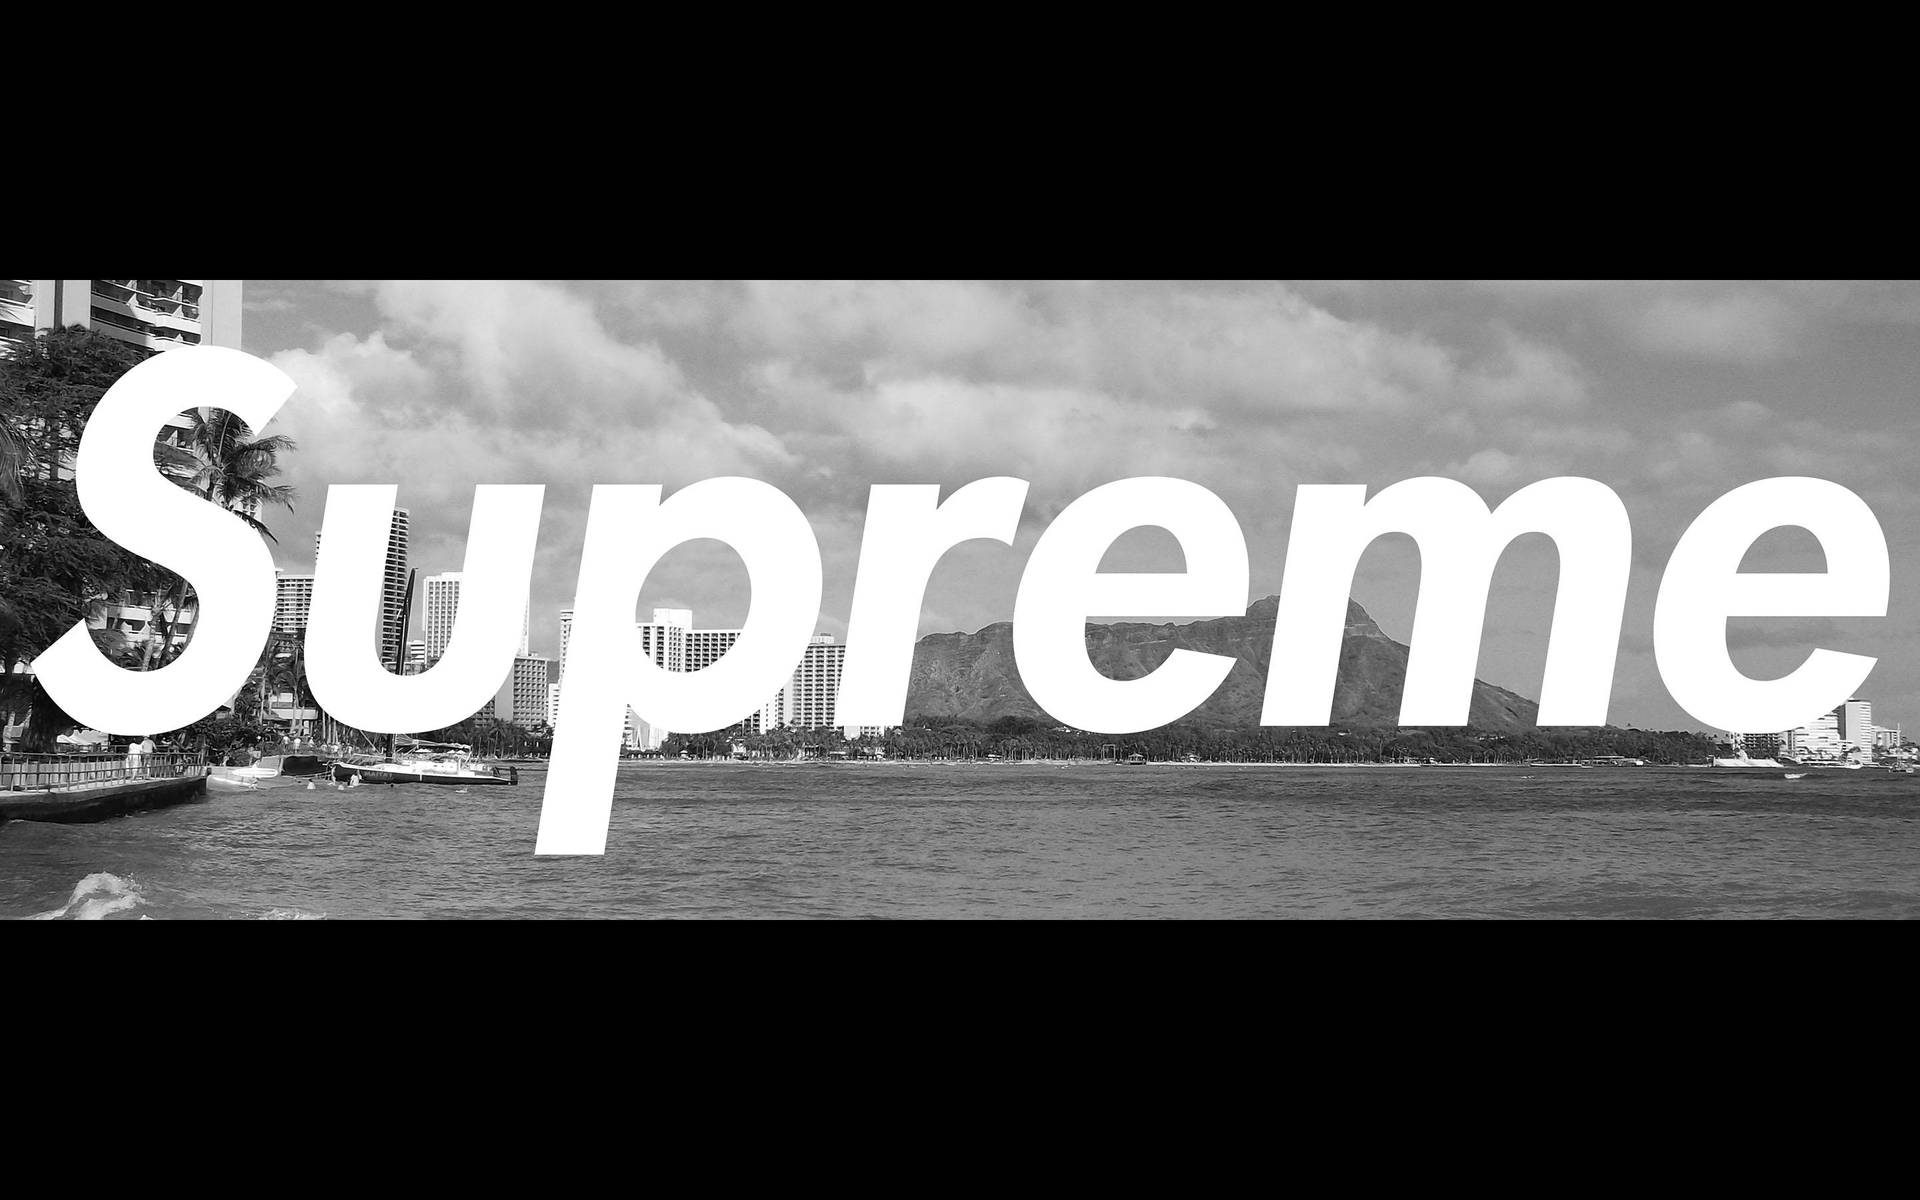 Stylish Supreme Laptop in Black and White Wallpaper